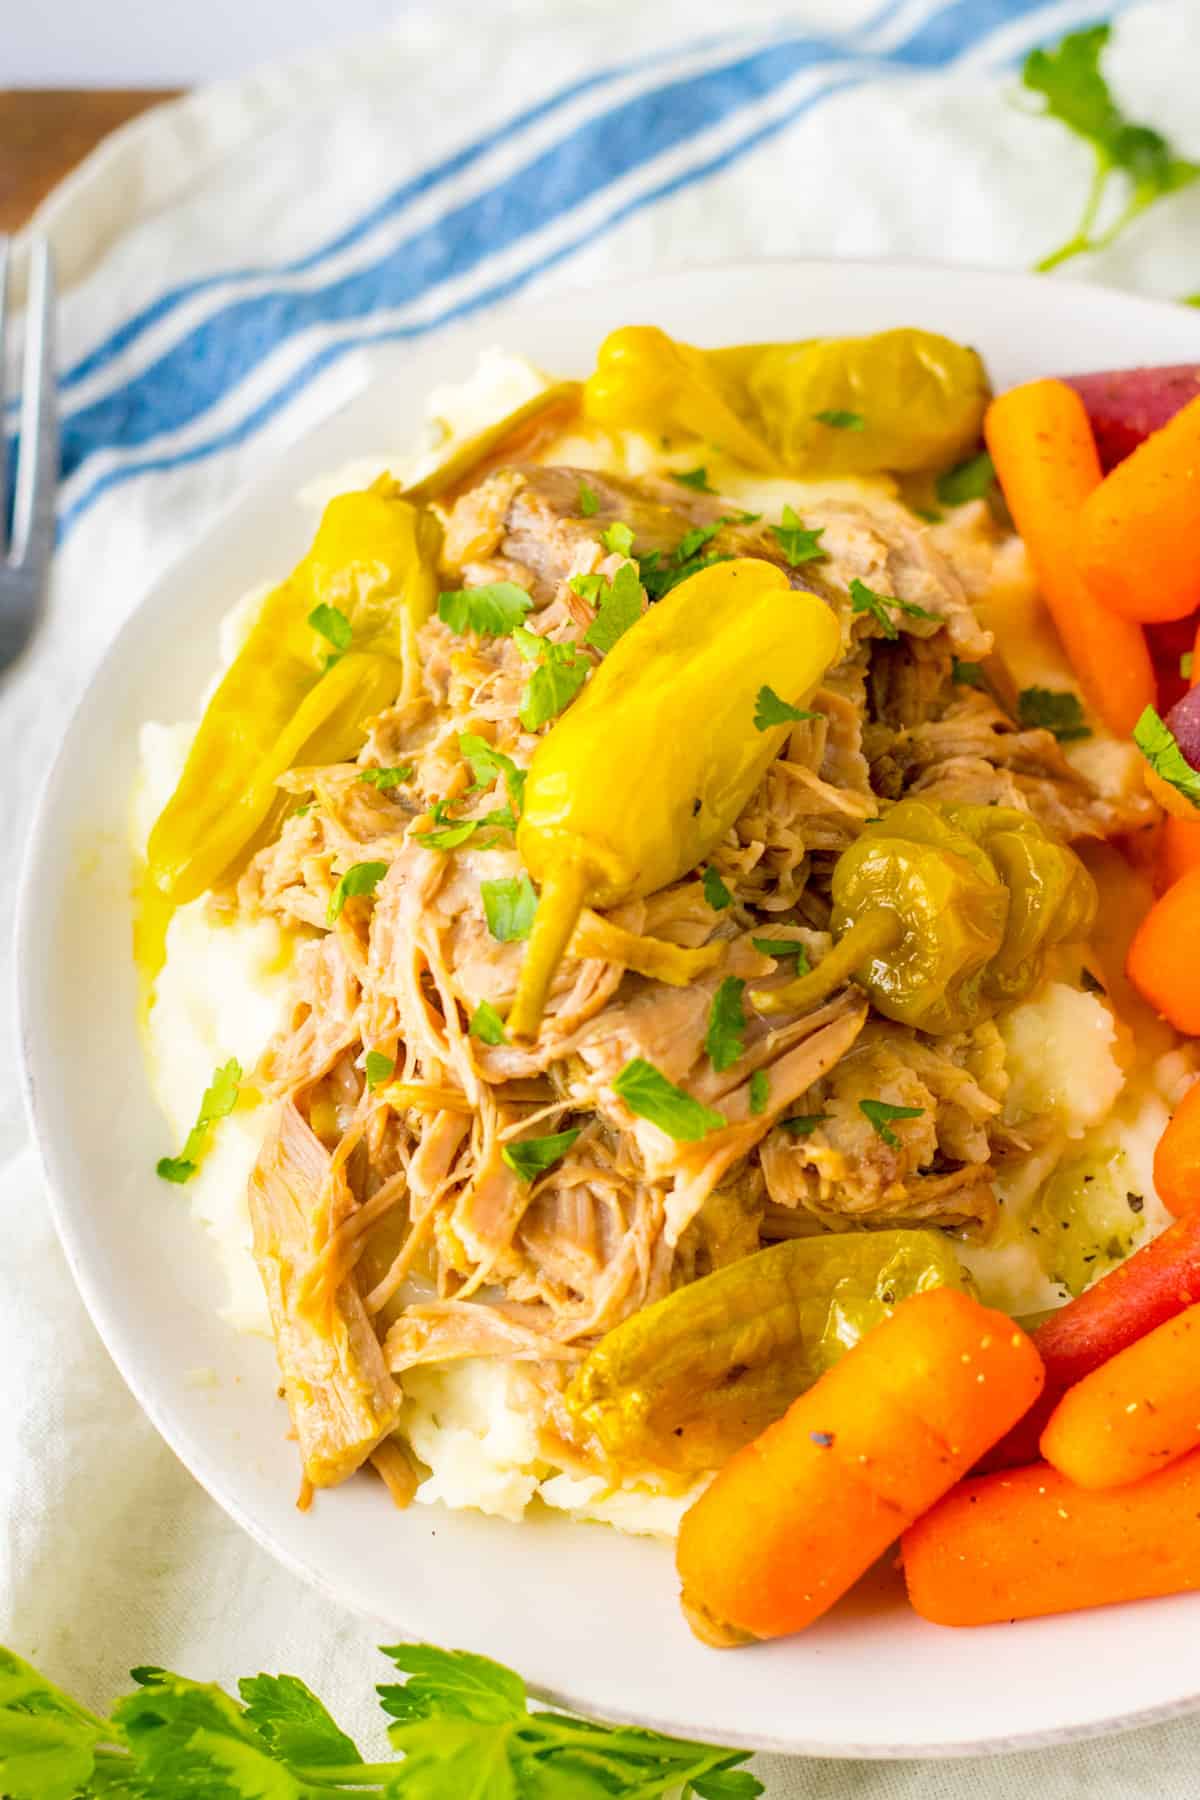 Juicy slow cooker Mississippi pork roast with pepperoncinis and carrots.